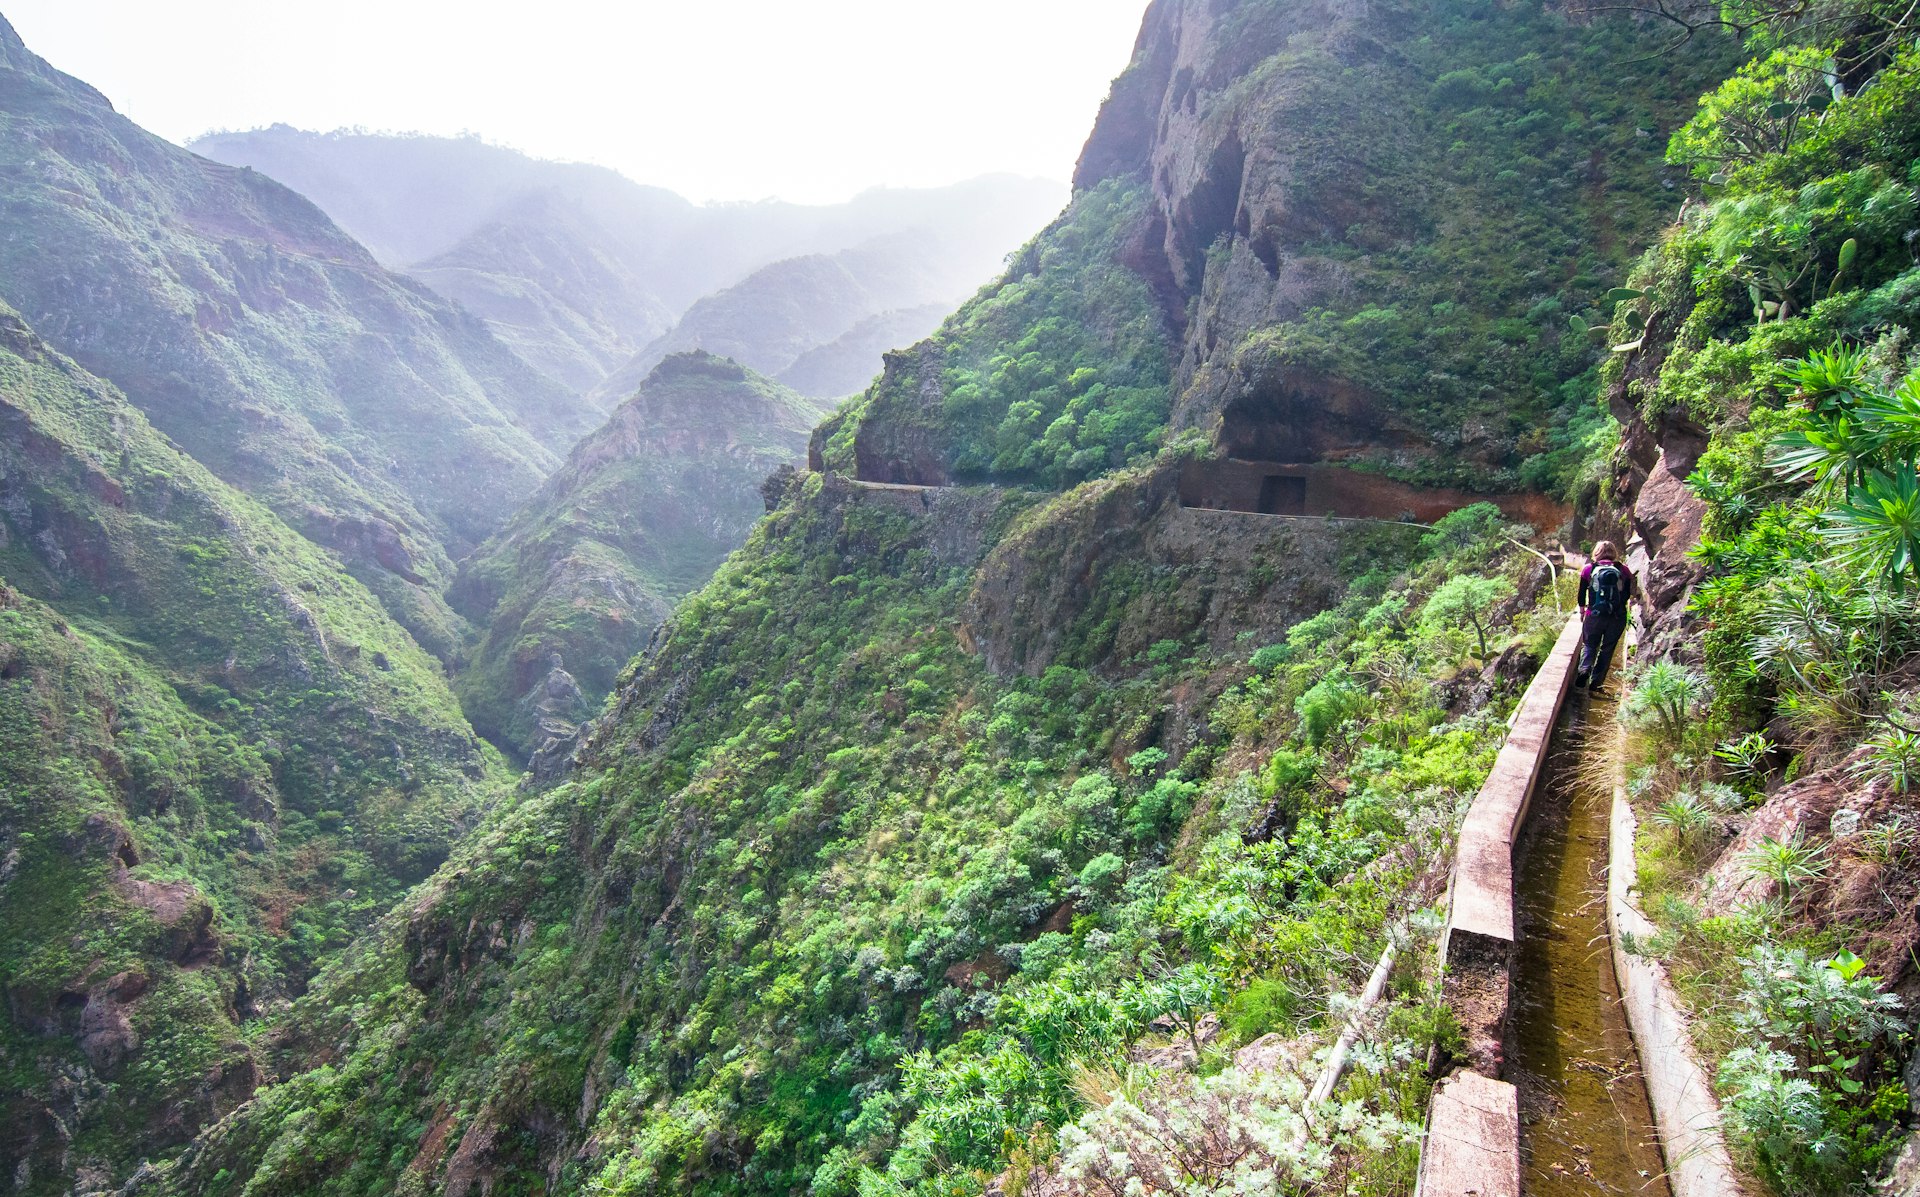 A hiker walks down an old aquaduct that winds along the side of jagged green mountains in Tenerife